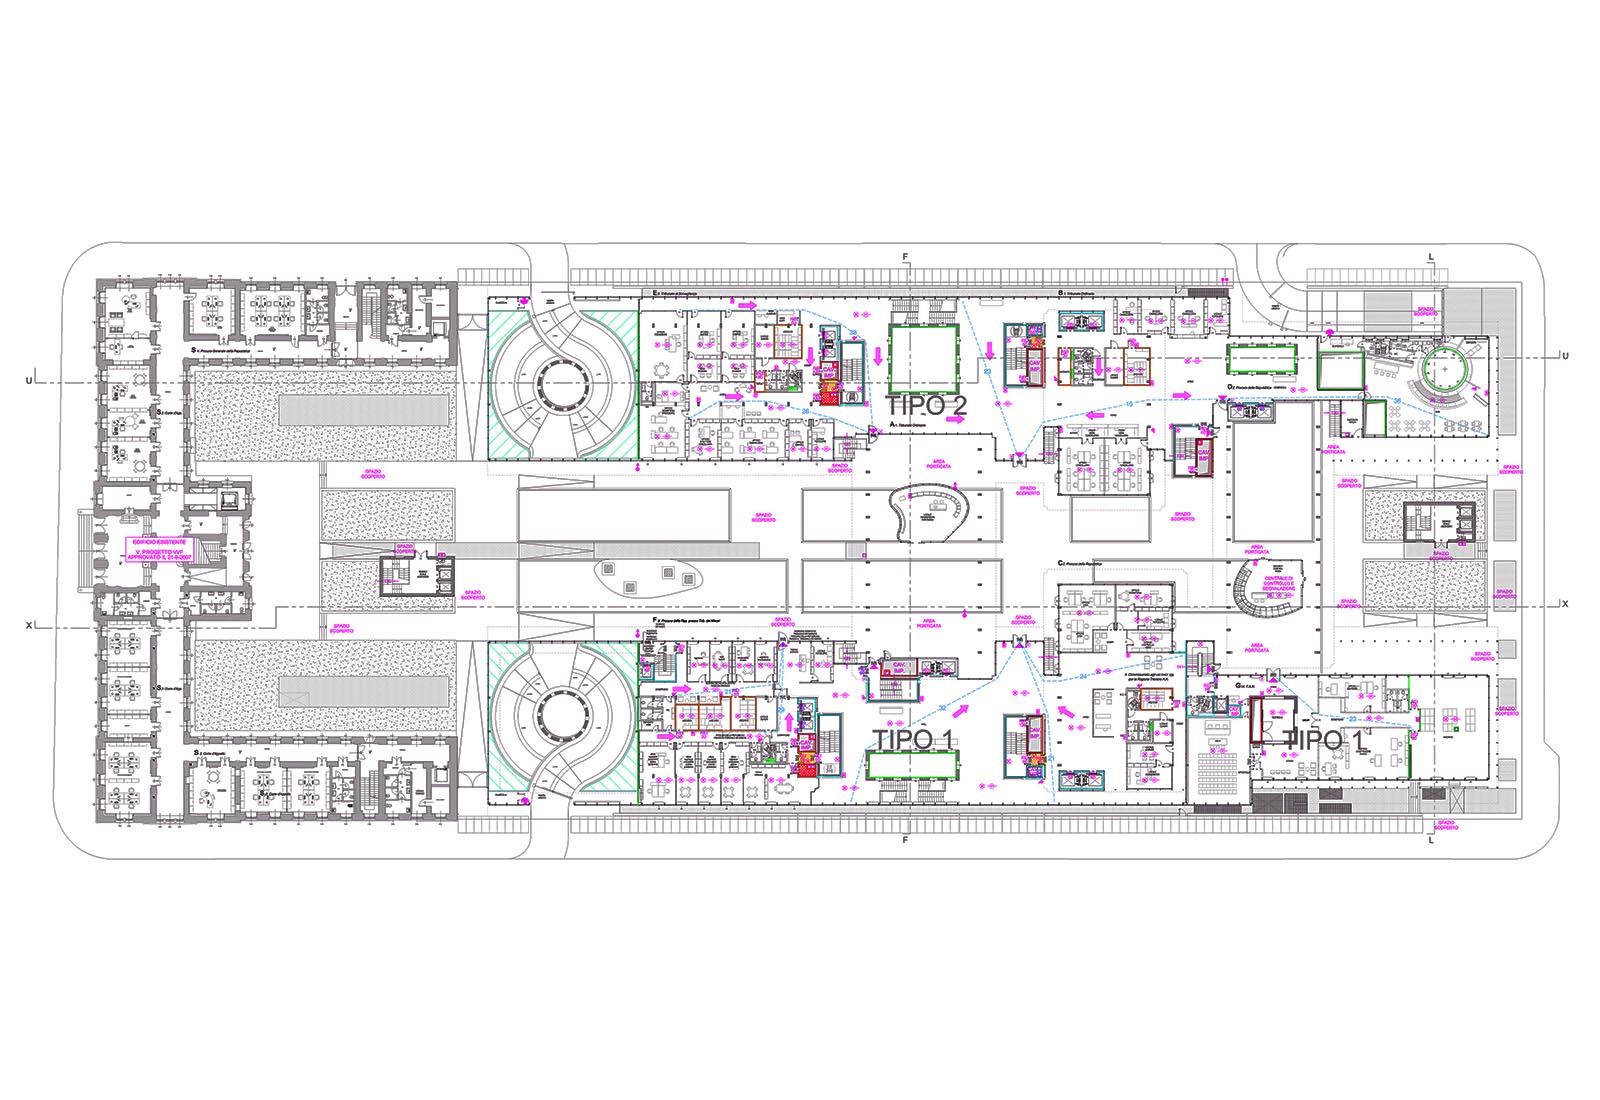 New courthouse in Trento - Fire protection ground floor plan